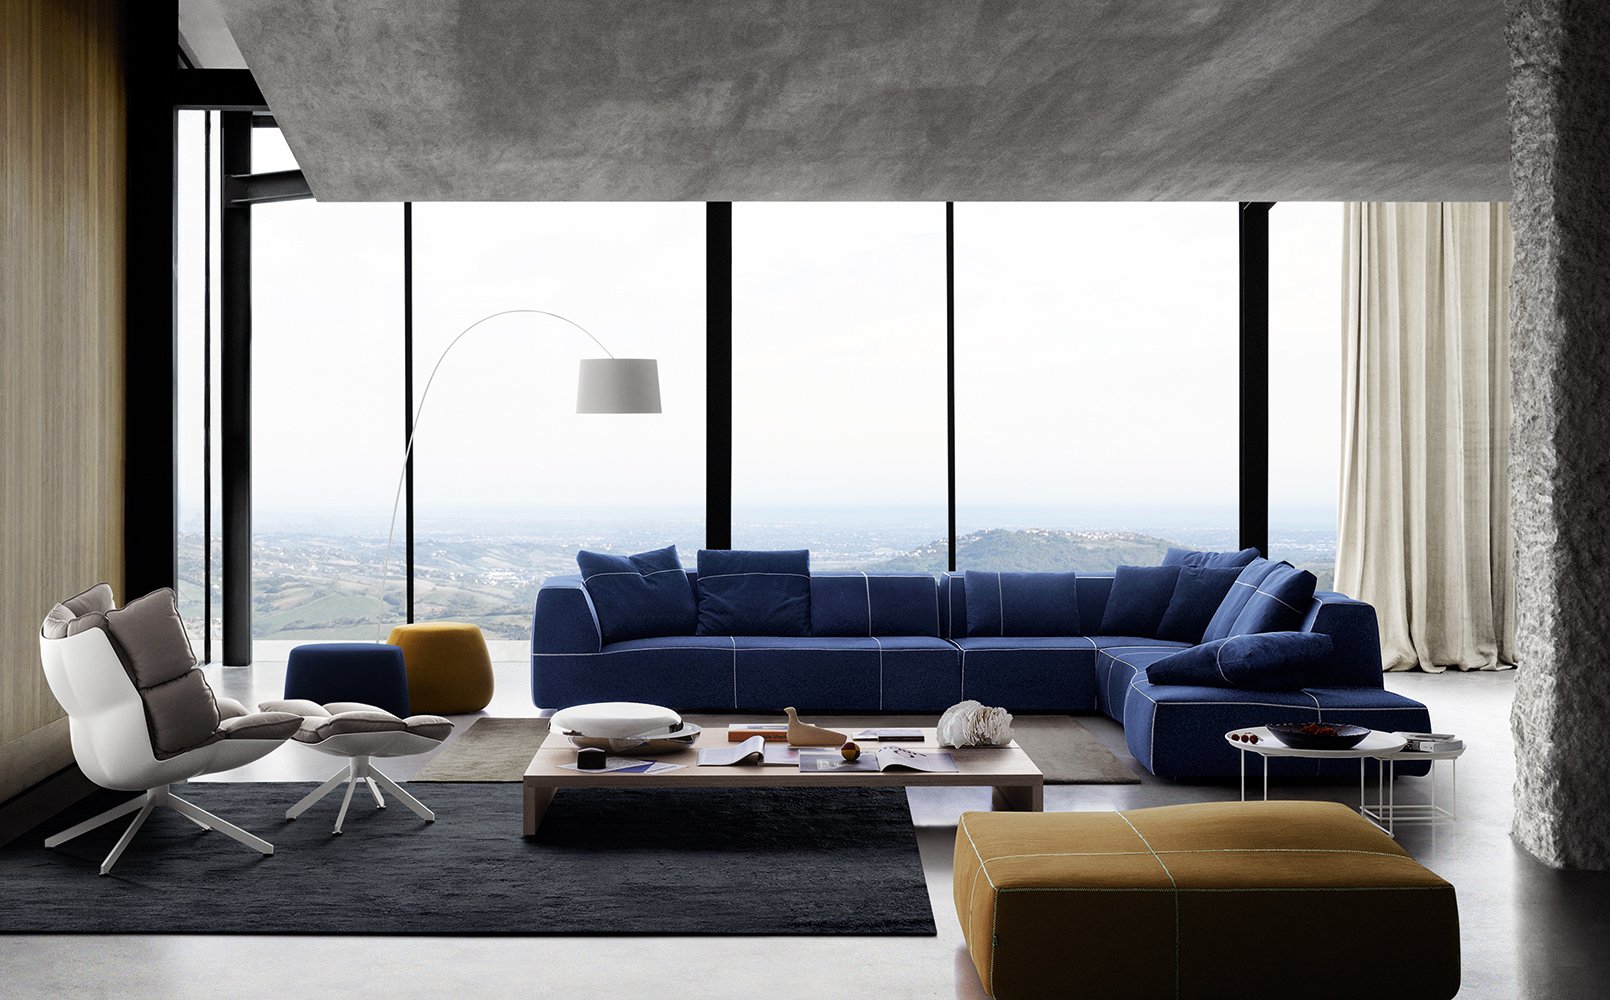  Building on the technological advances developed in the 60s, the Bend sofa by Patricia Urquiola involved complex 3D modelling to create the form which Urquiola describes as 